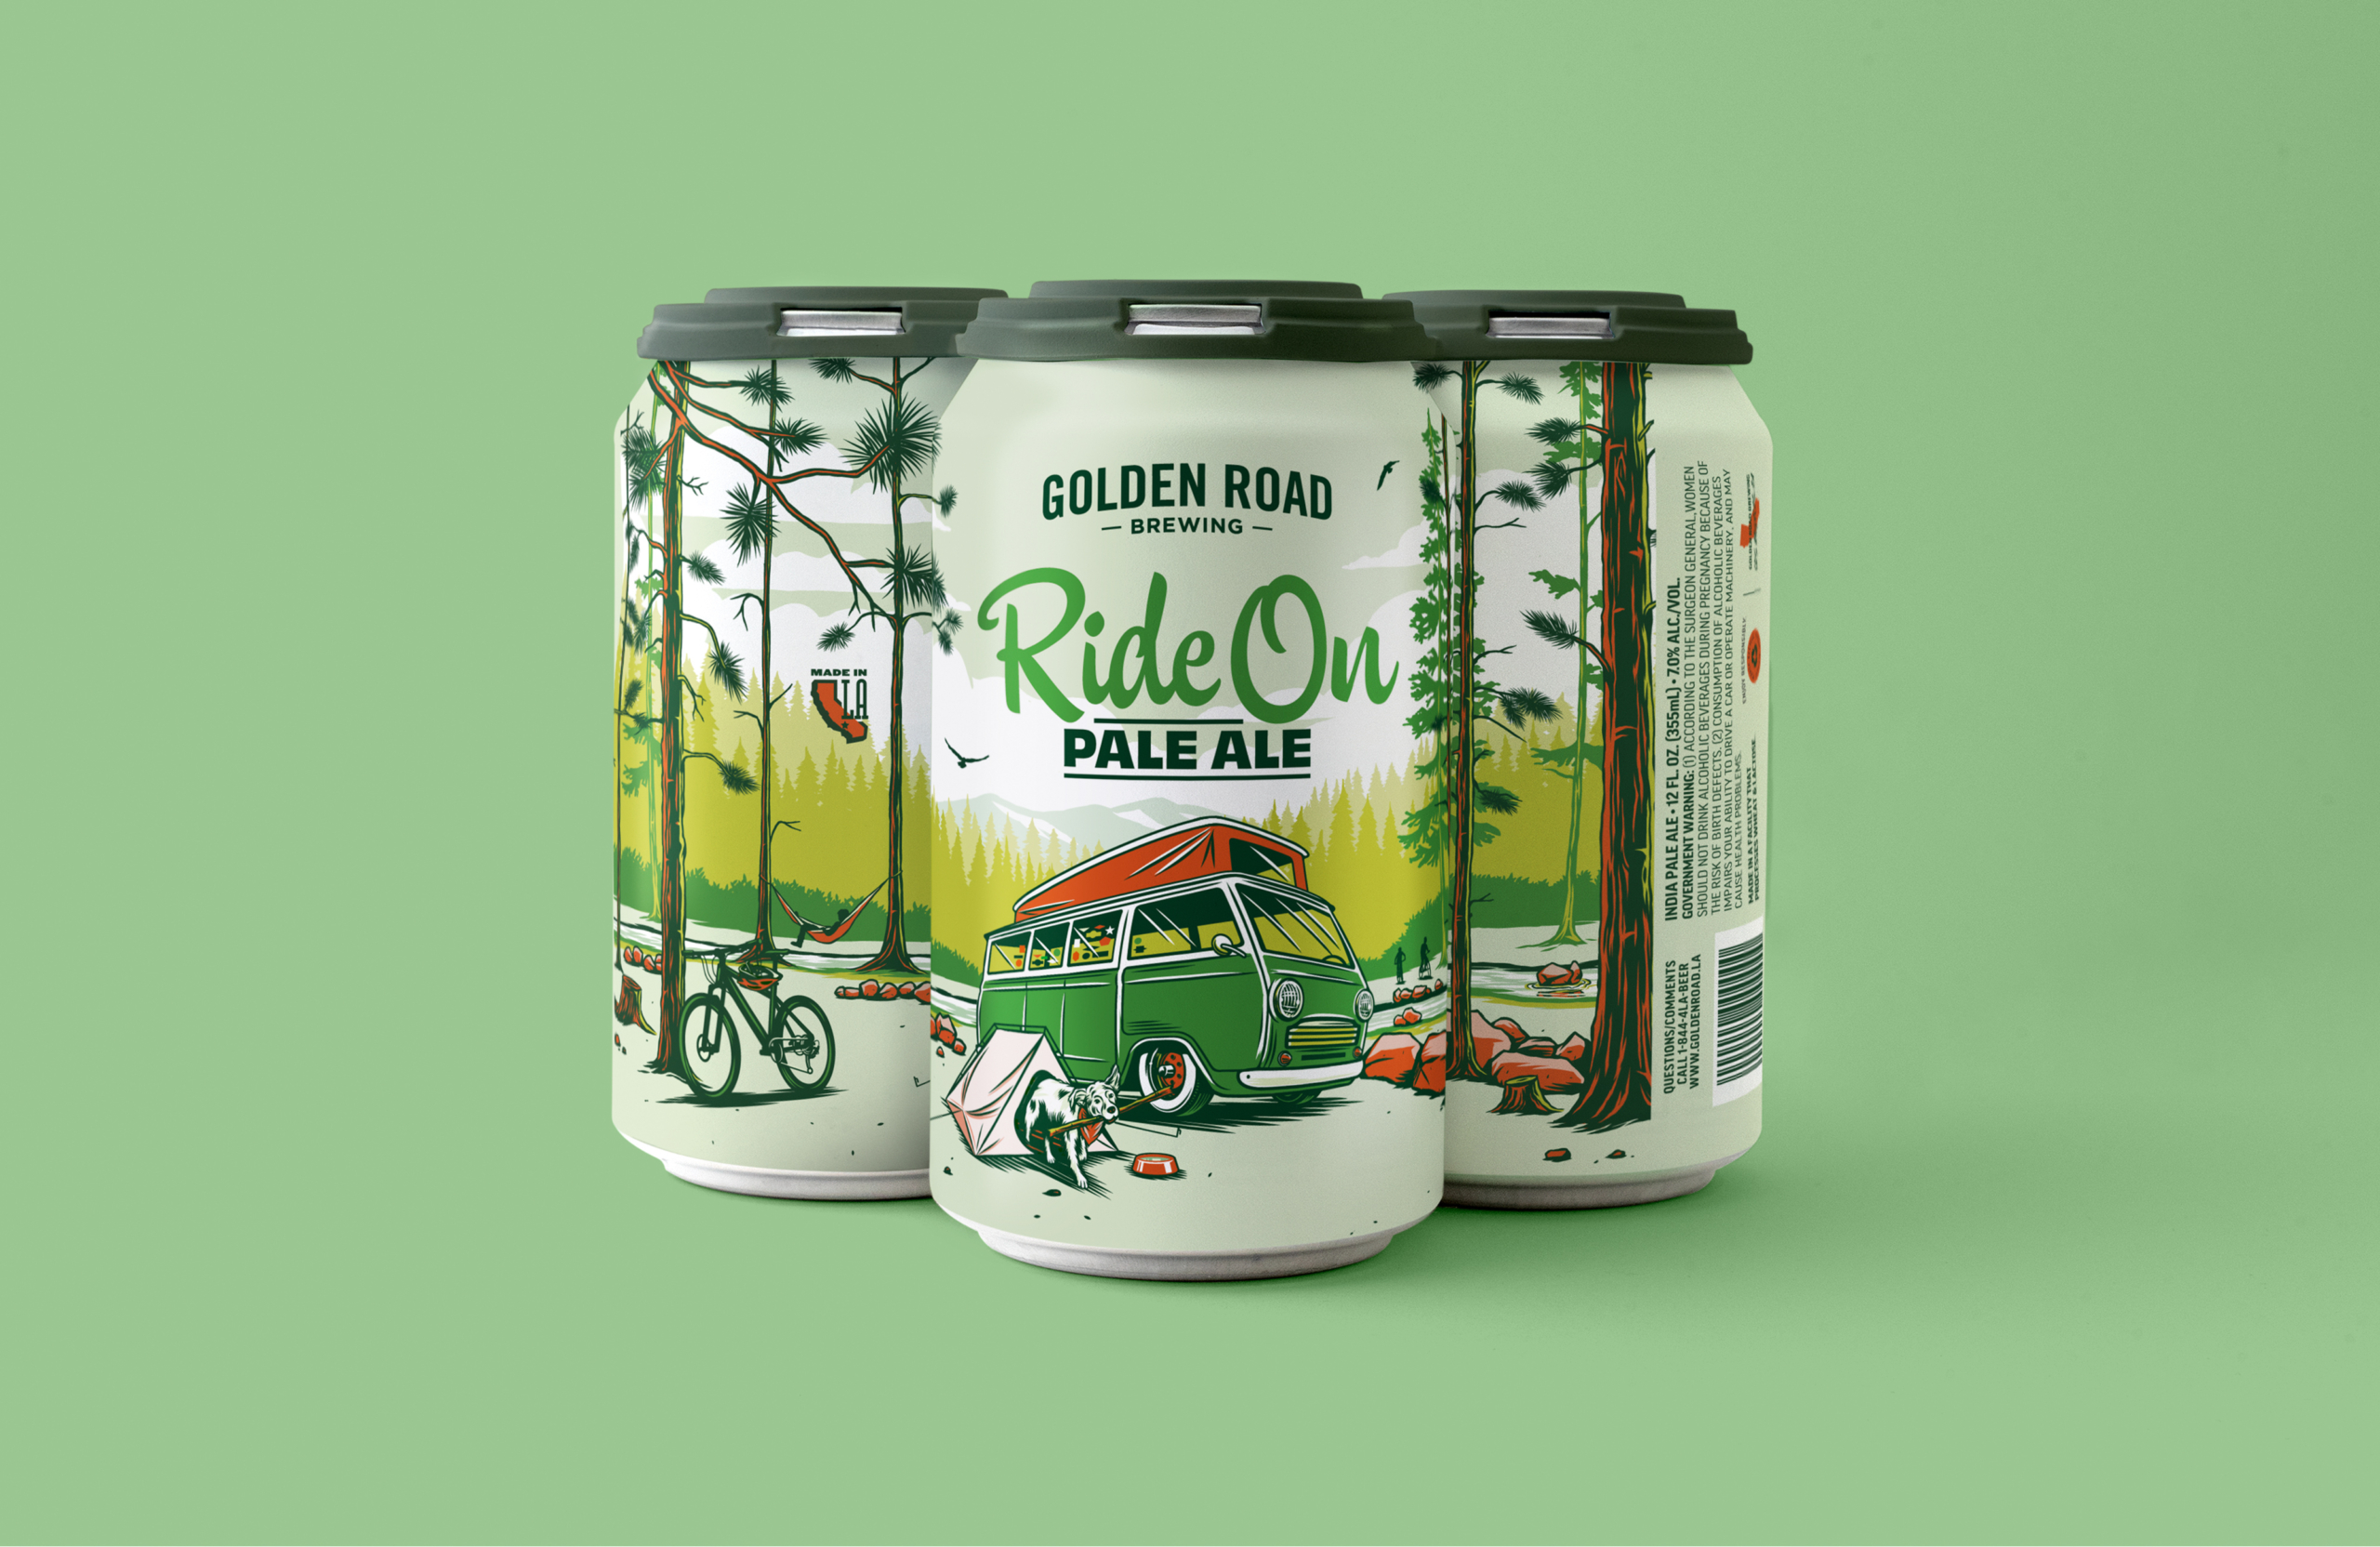 Three cans of Golden Road Ride On Pale Ale against a light green background. The cans are light green with a charming illustration of a vintage green van parked on the shore of a lake in the forest, camping. A cute dog is seen coming out of its own small “pup-tent” in the foreground, carrying a stick. The beer name is Ride On Pale Ale, which is seen in playful kelly green script and dark green block letters.